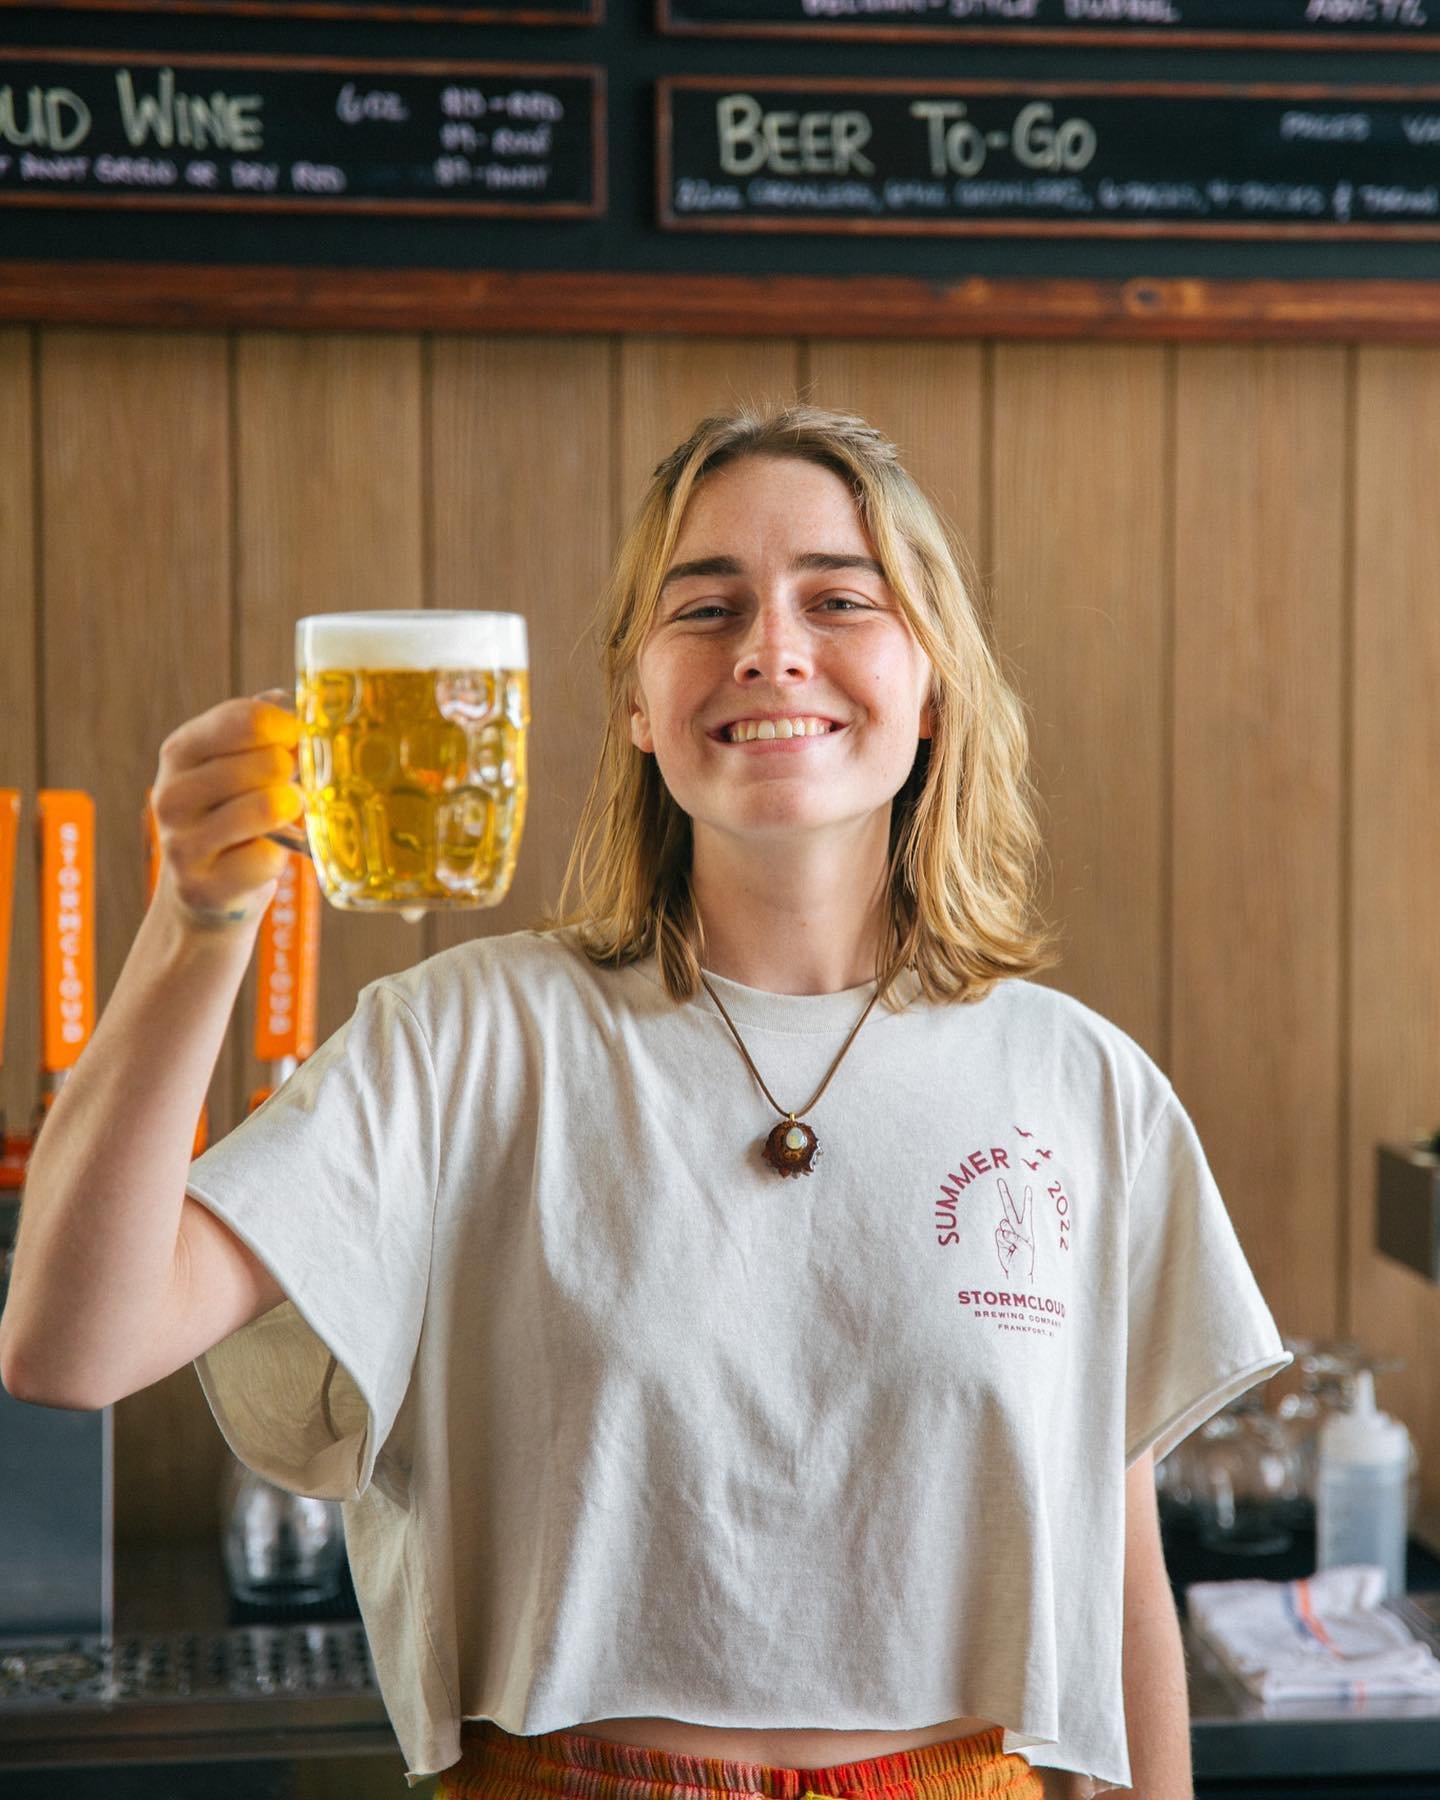 Meet Rachel! 

Rachel is our social media manager/photographer &amp; server here at Stormcloud. She&rsquo;s been working here for two years now. If you&rsquo;ve seen one of our servers hugging dogs, it&rsquo;s probably her. Catch her pourin&rsquo; pi